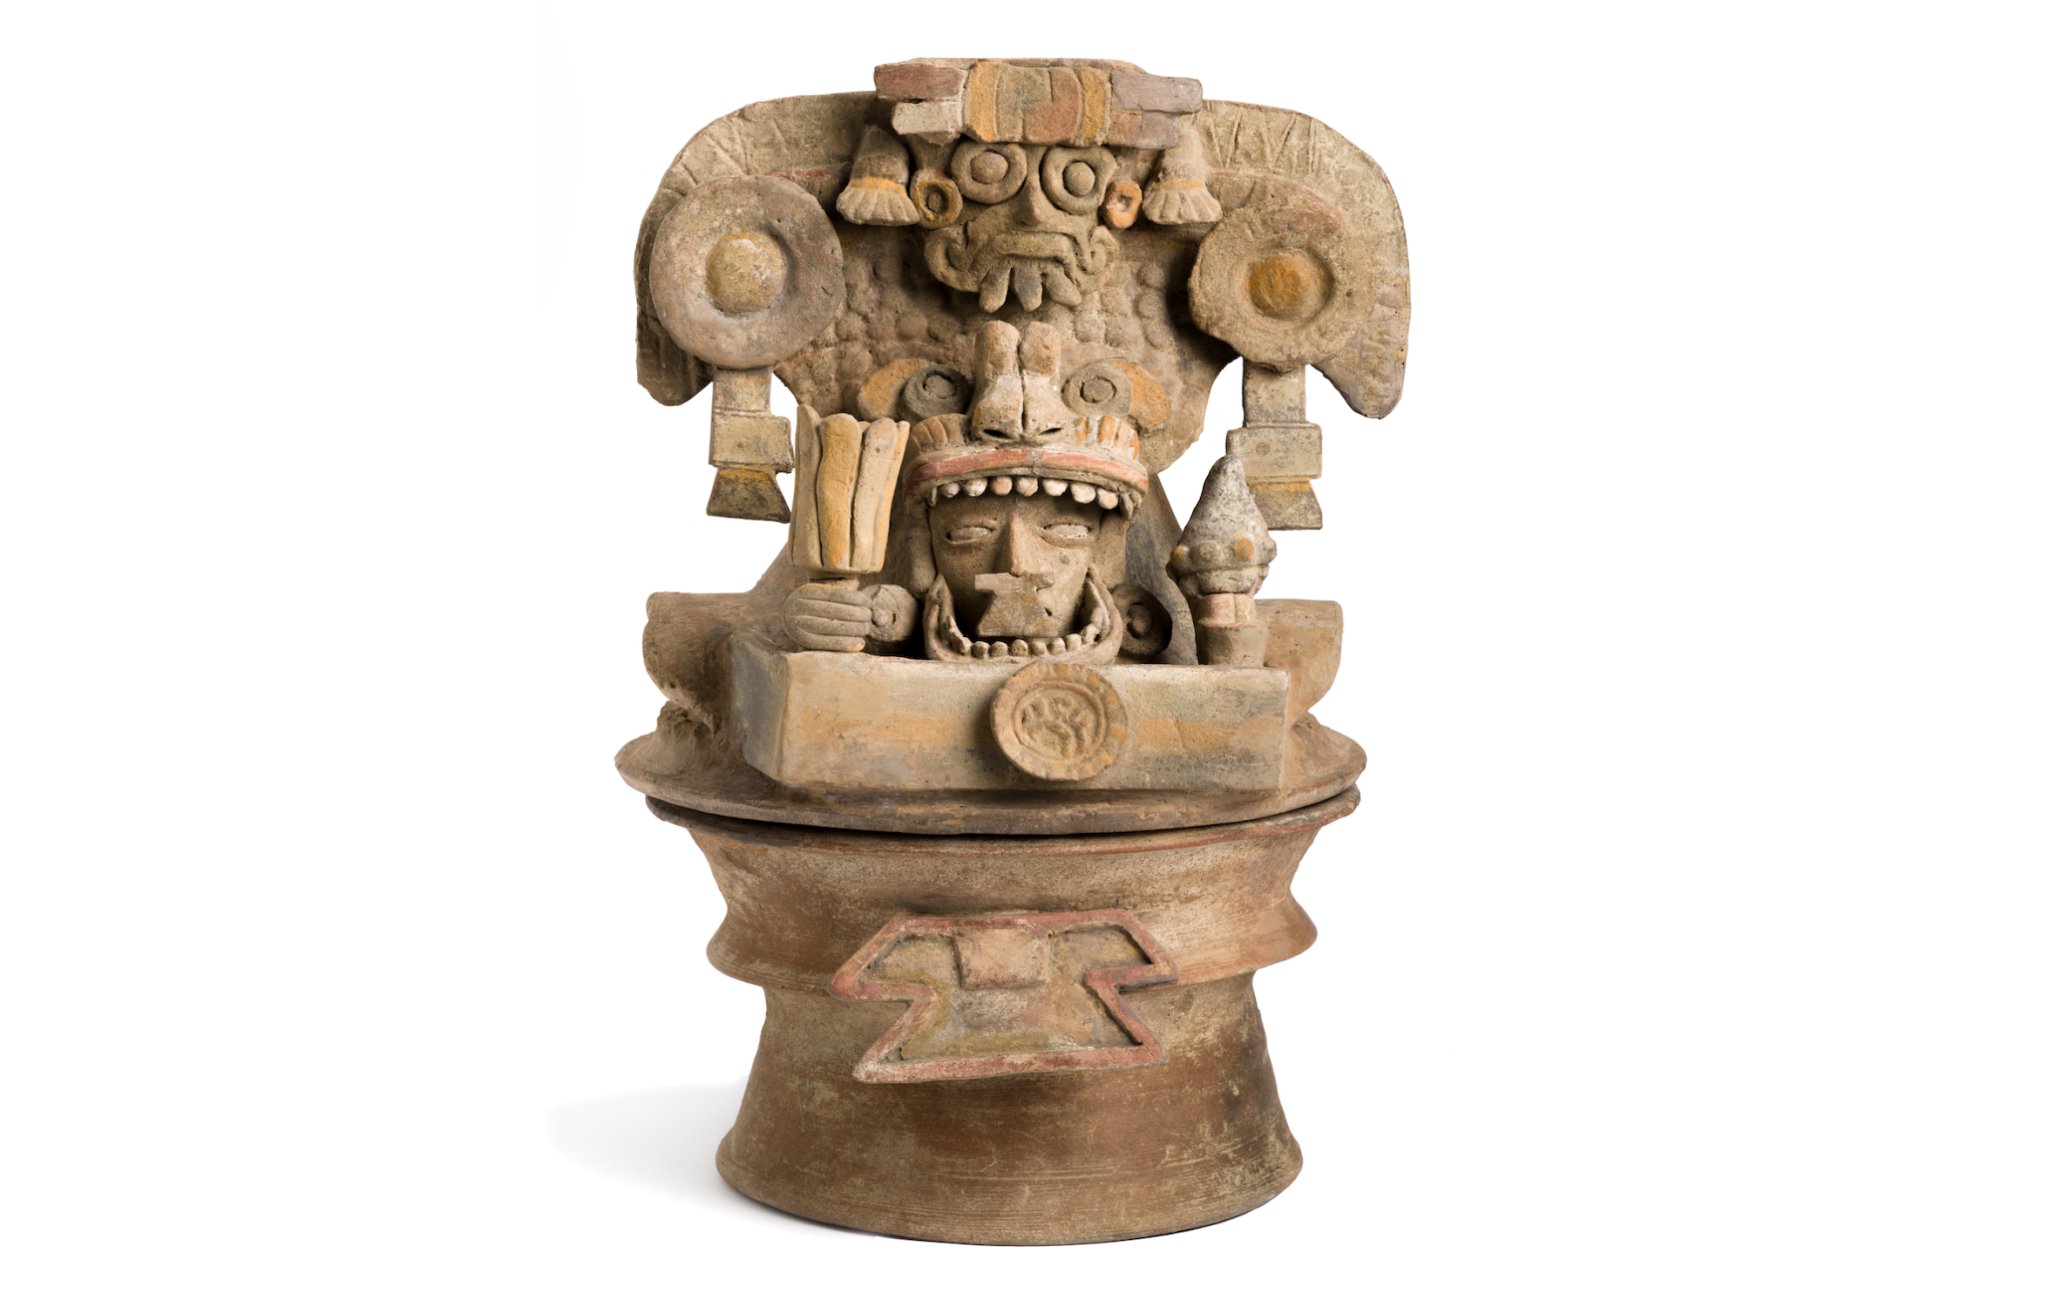 A 300–600 CE sculpture from Maya depicting a person inside a monstrous costumer. The head is positioned in the mouth of the being